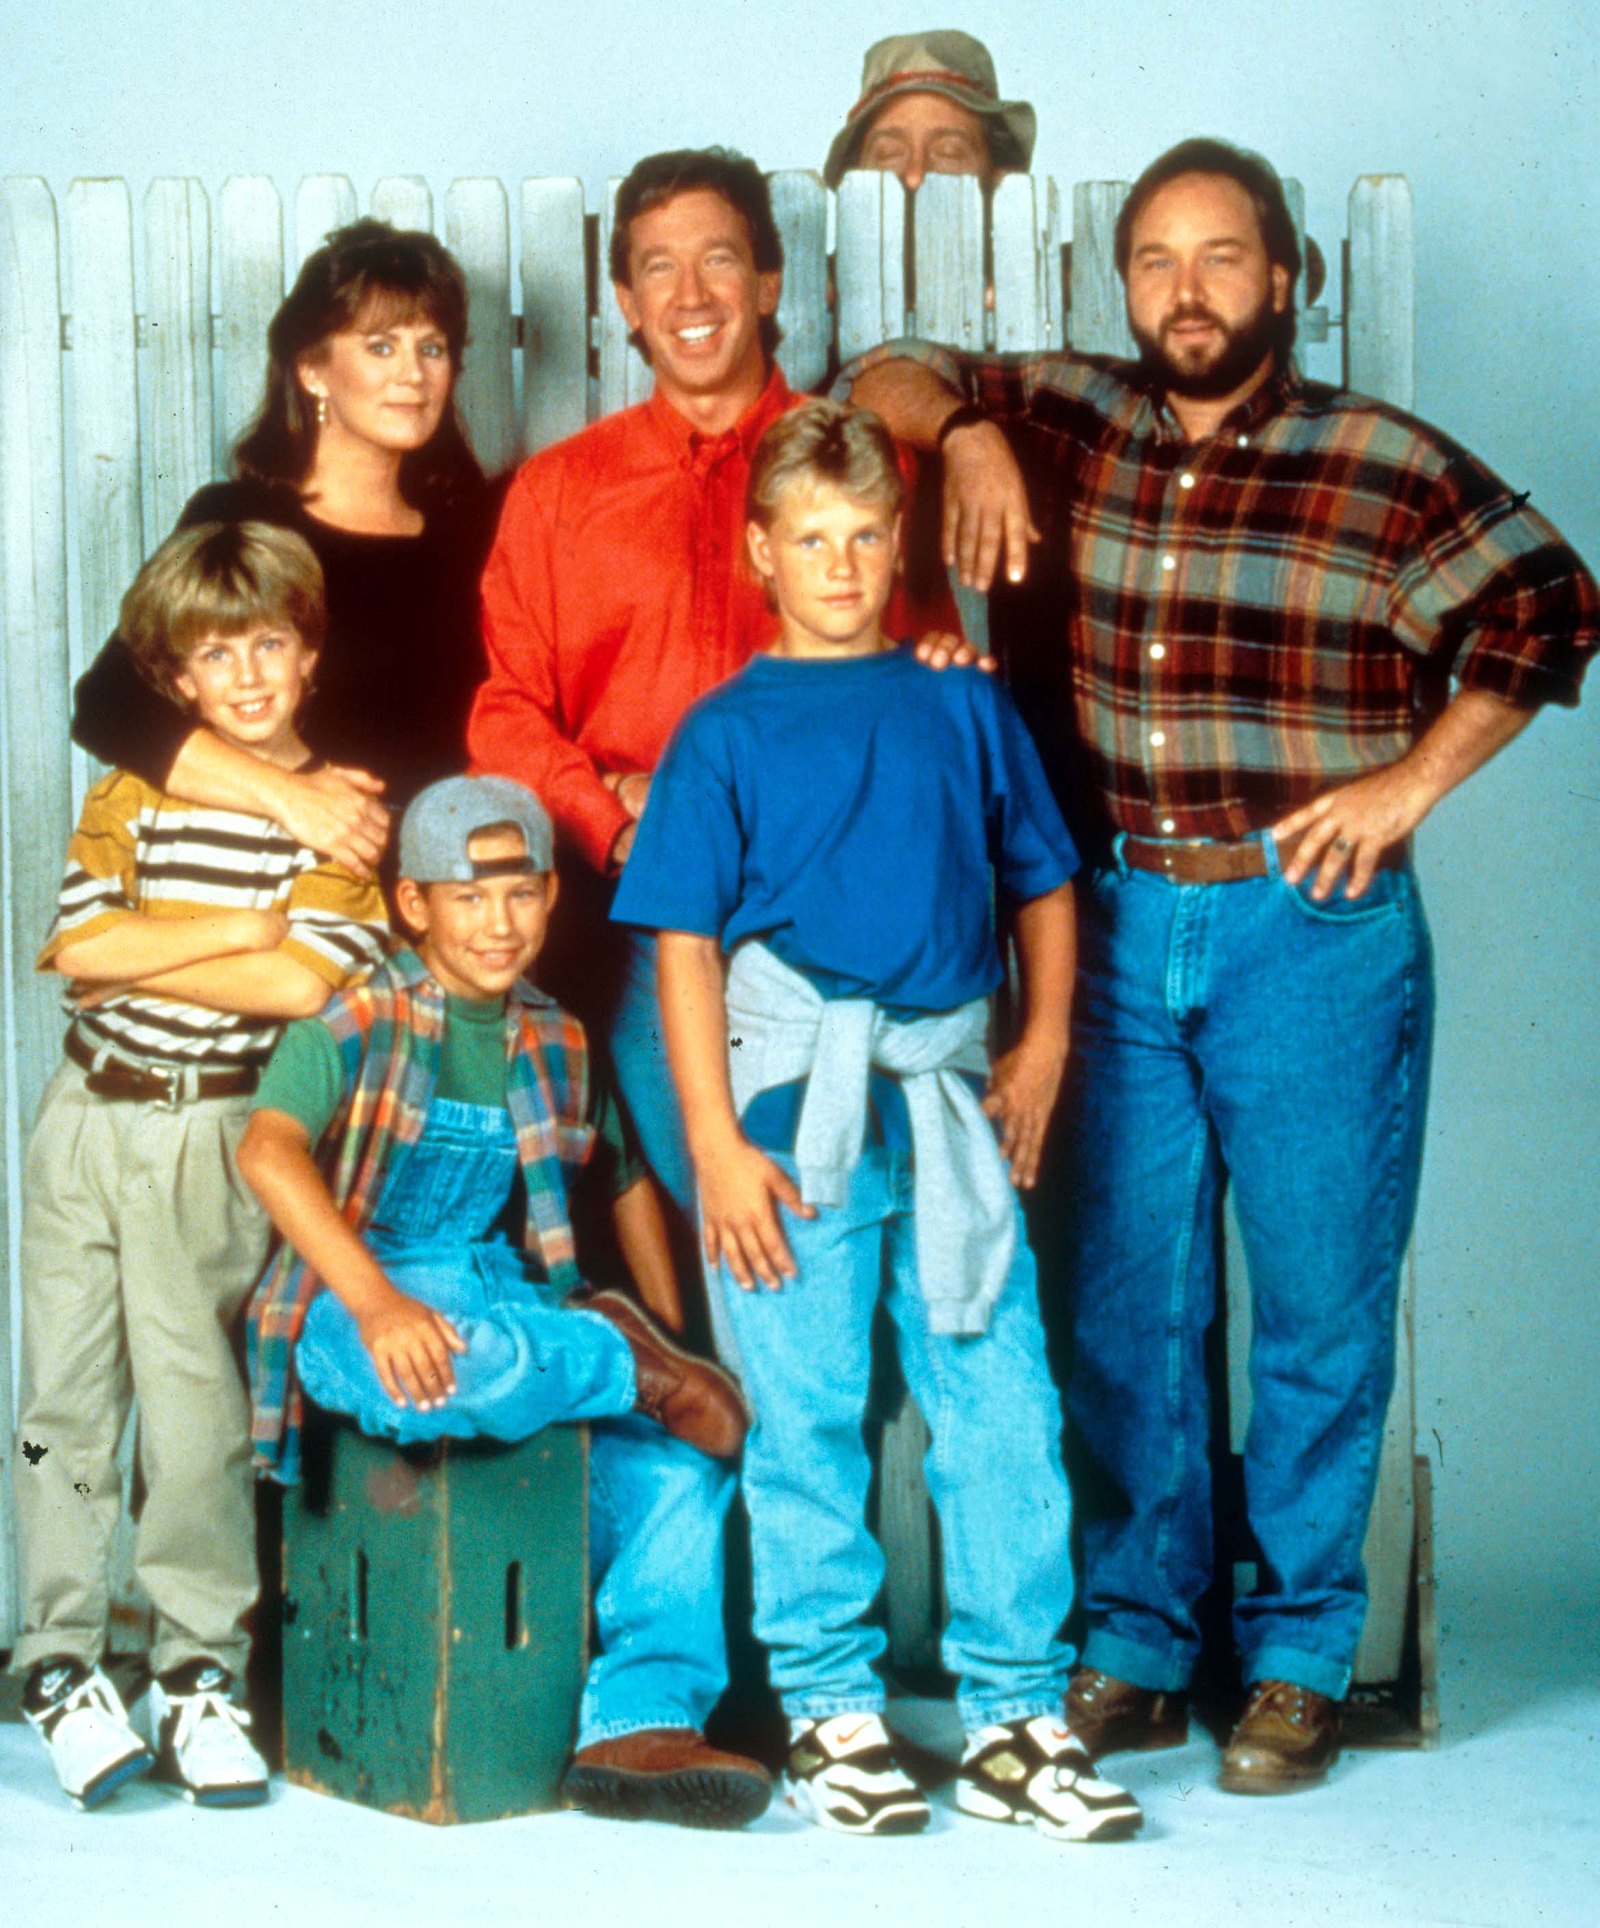 Home Improvement' Where Are They Now?